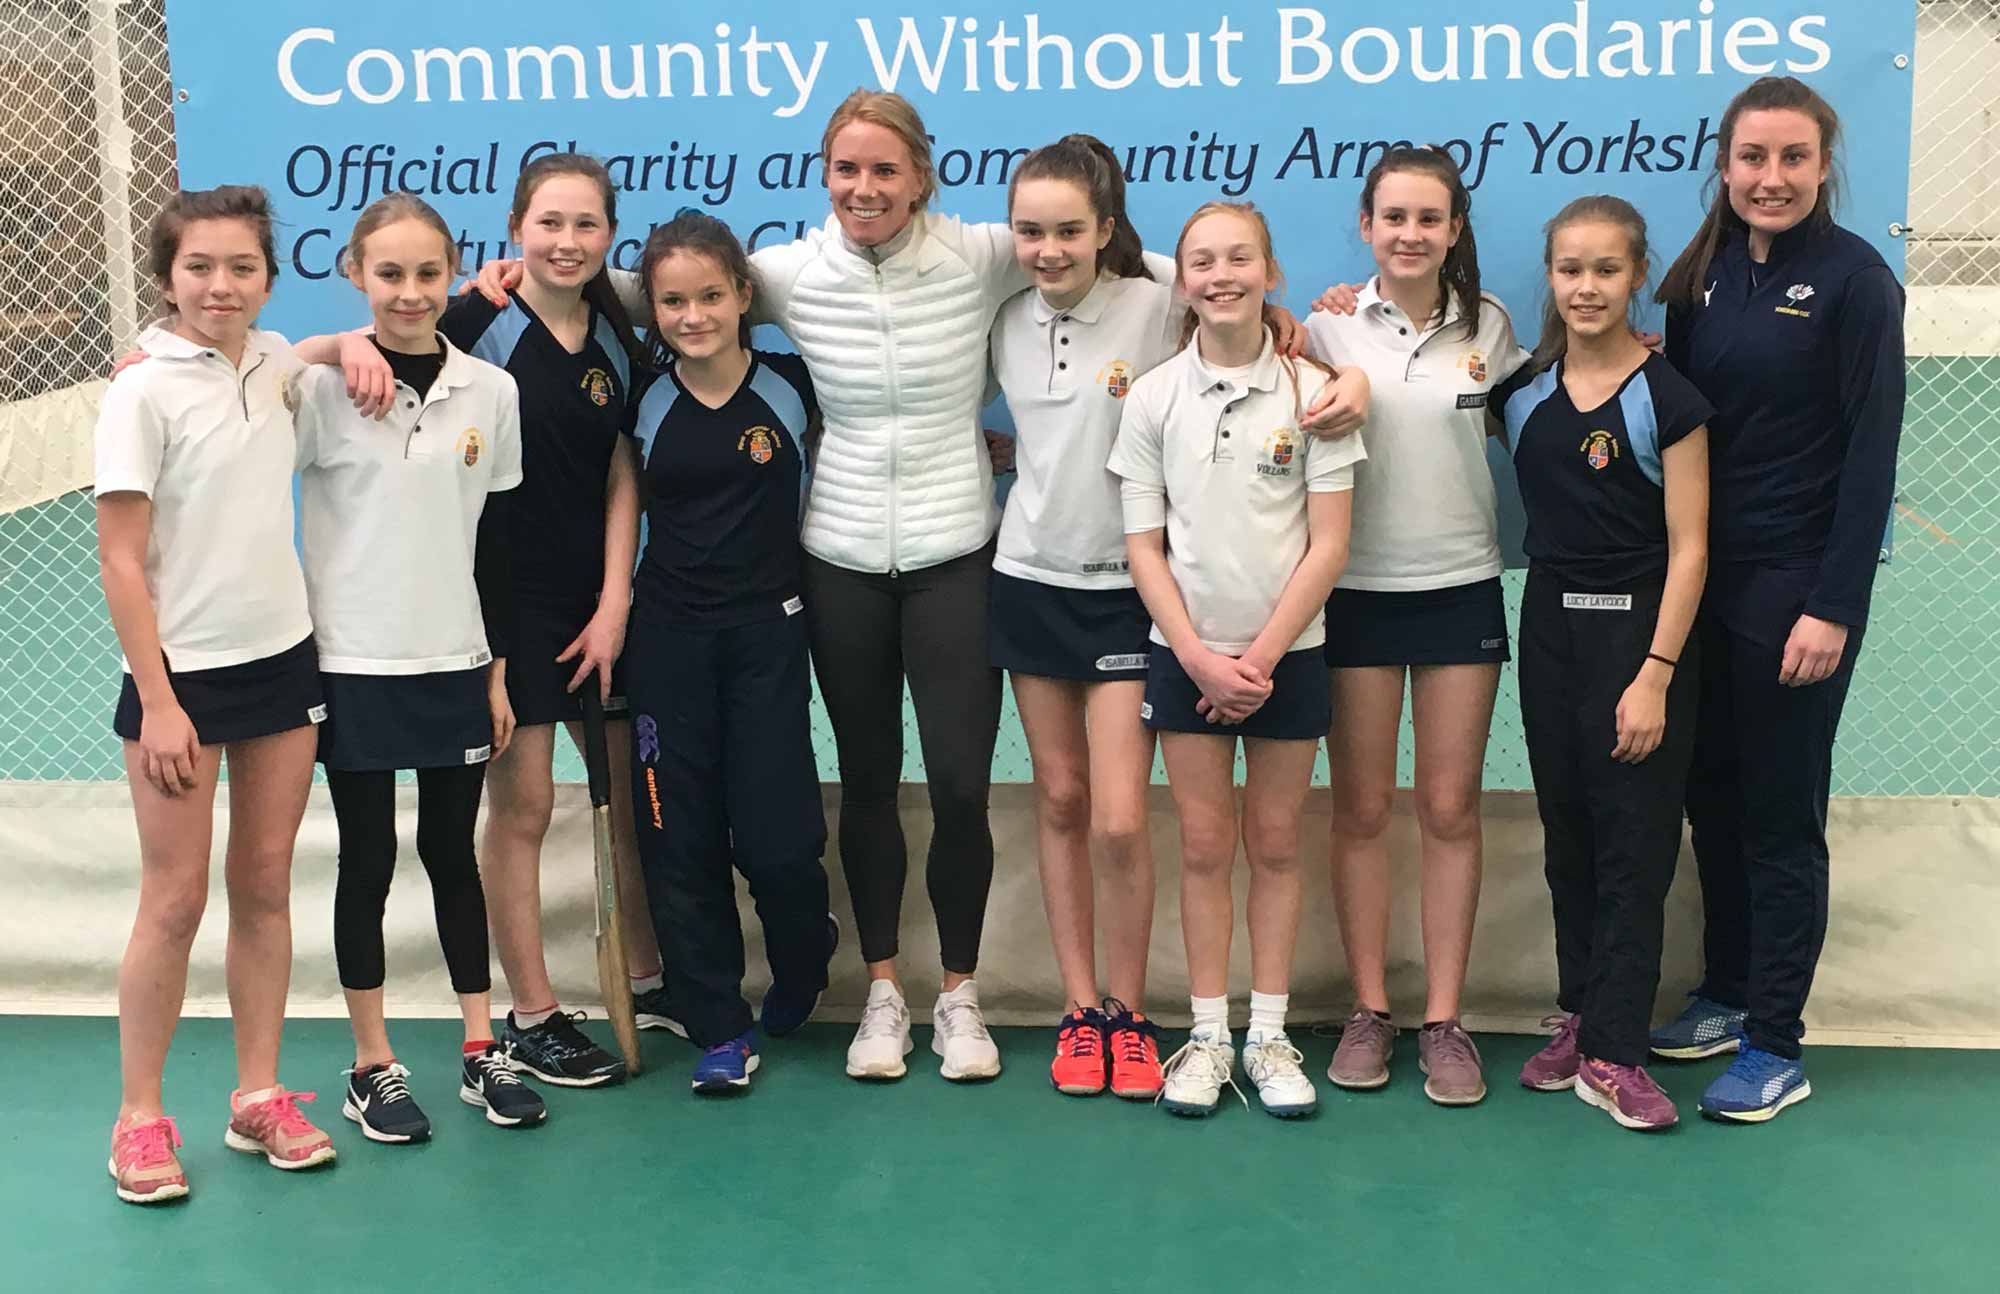 the cricket team pictured with Lauren Winfield, centre, and Yorkshire County Cricket Club girls' community coach Rachel Hildreth, right